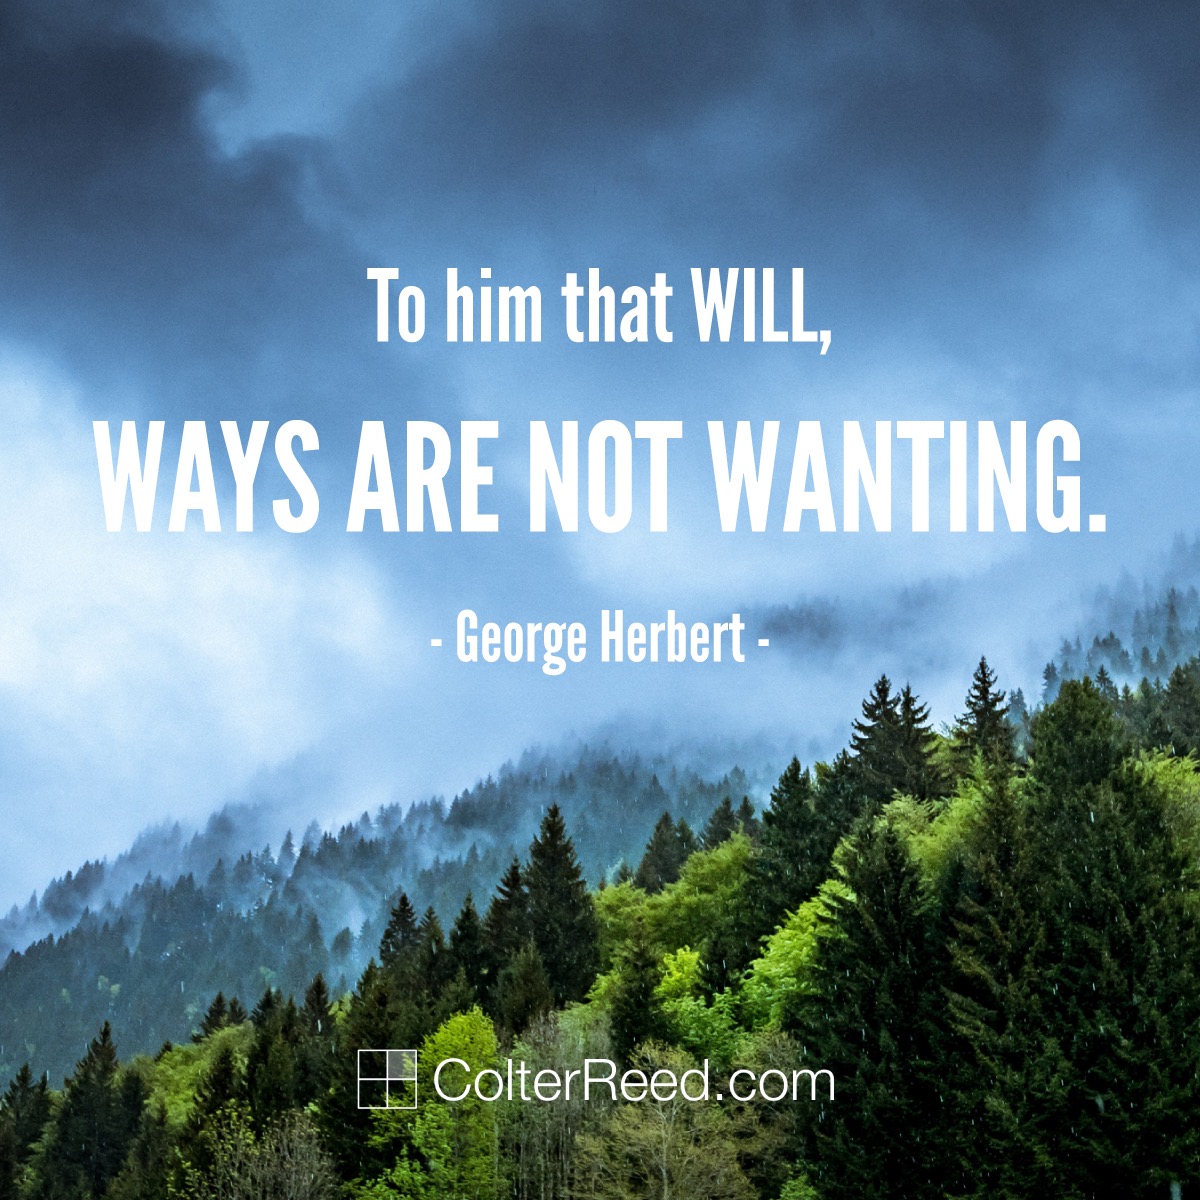 To him that will, ways are not wanting. —George Herbert